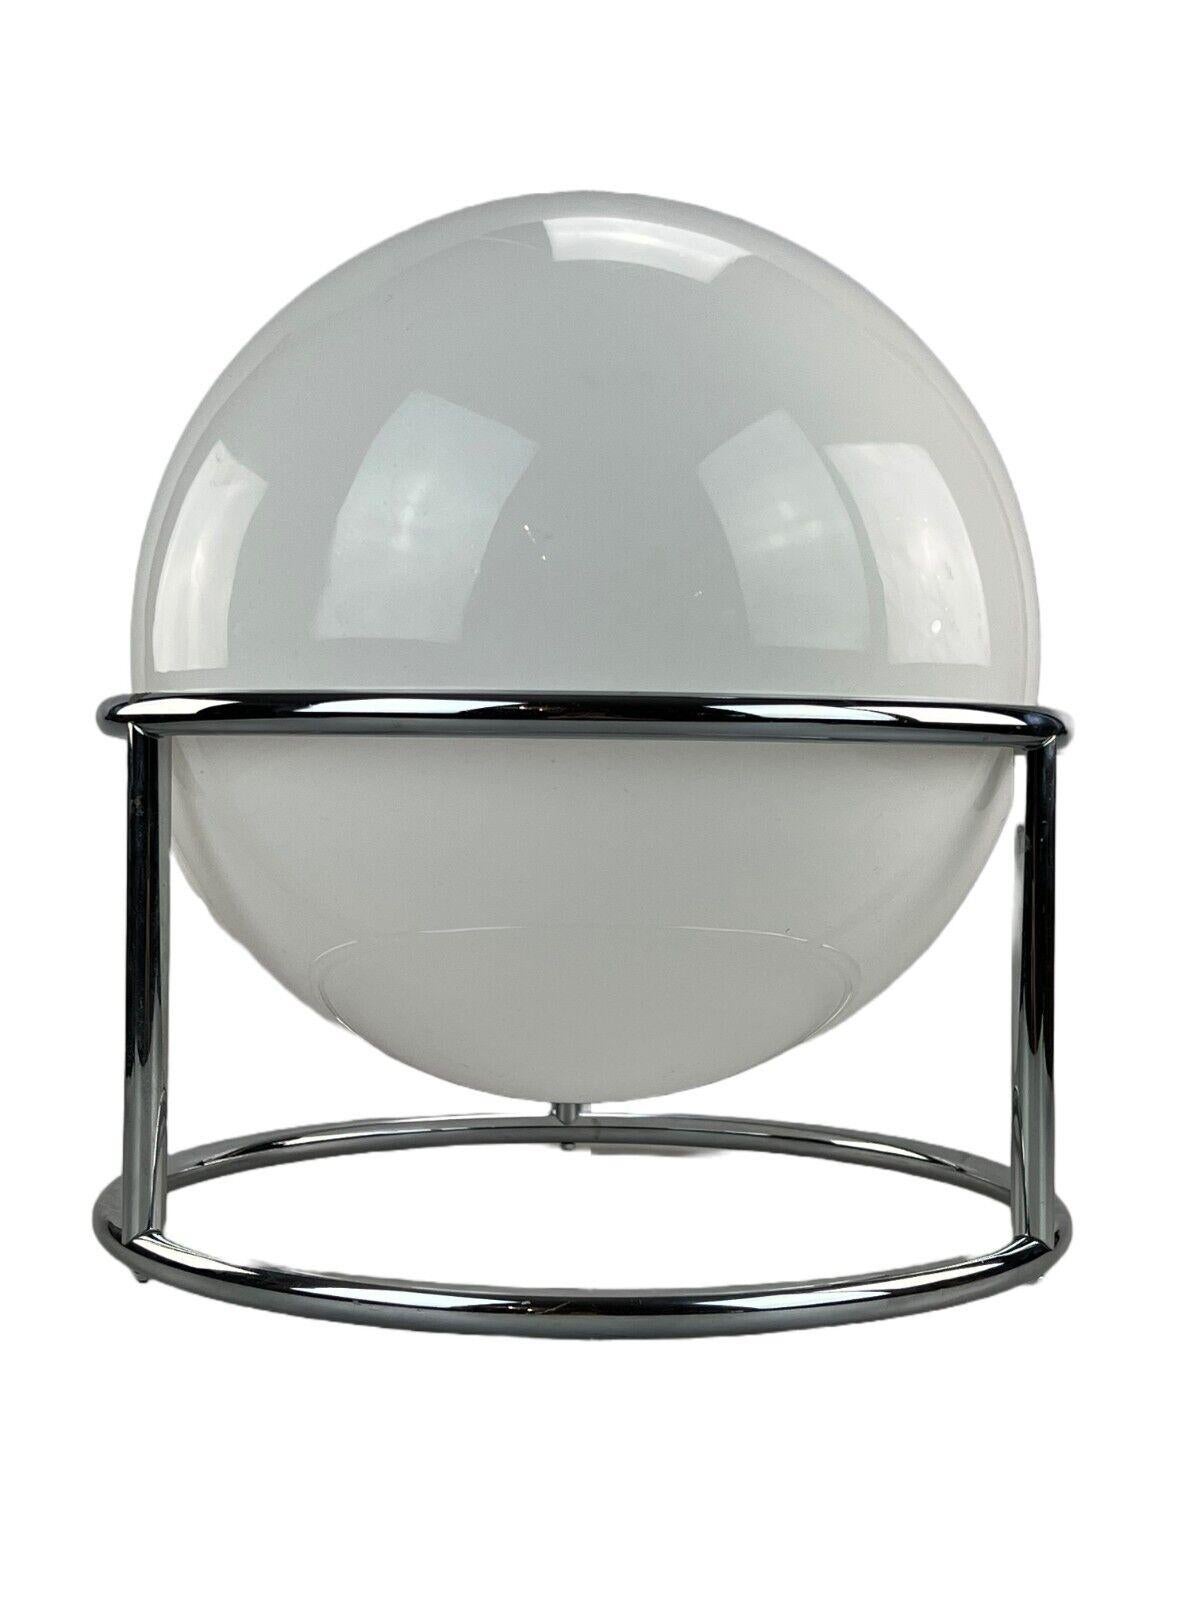 60s 70s ball lamp lamp light table lamp space age design glass metal

Object: spherical lamp

Manufacturer:

Condition: good

Age: around 1960-1970

Dimensions:

Diameter = 32.5cm
Height = 34cm

Other notes:

E27 socket

The